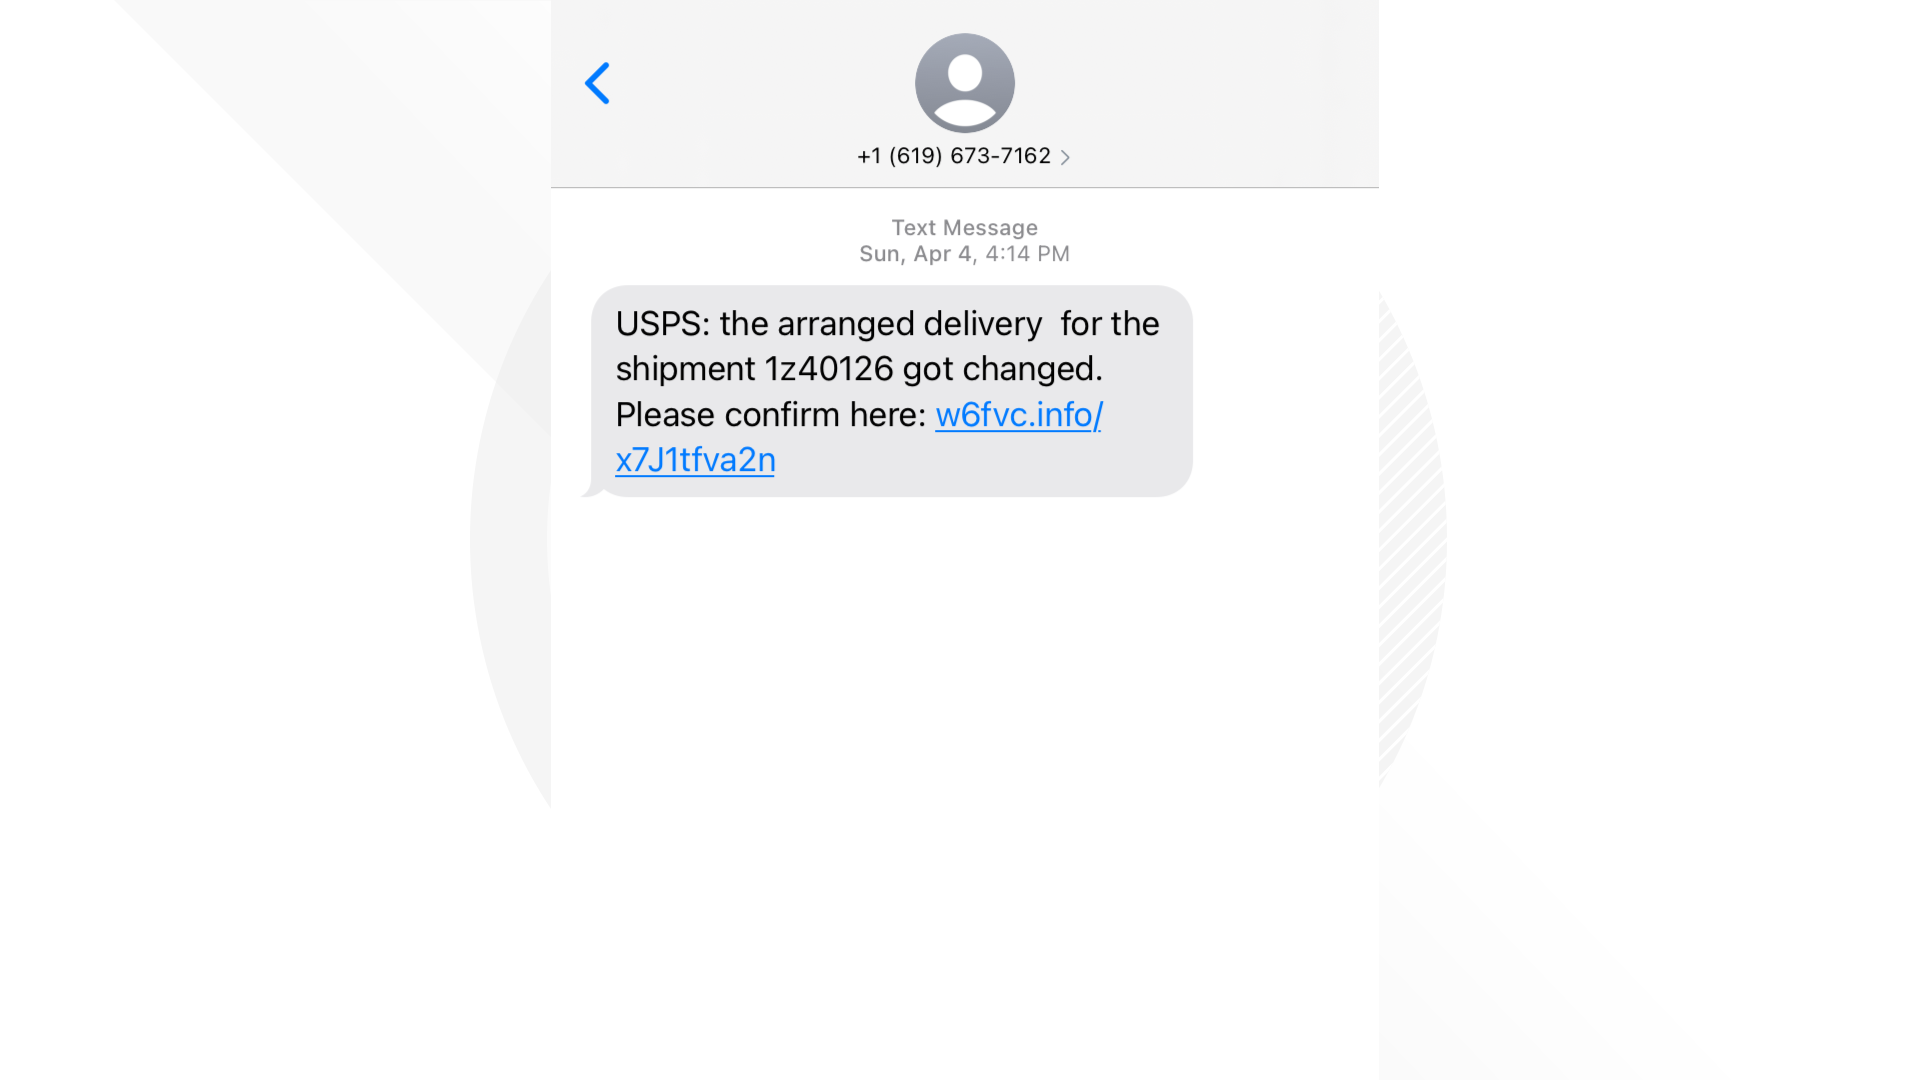 Delivery text message from USPS is likely a smishing scam